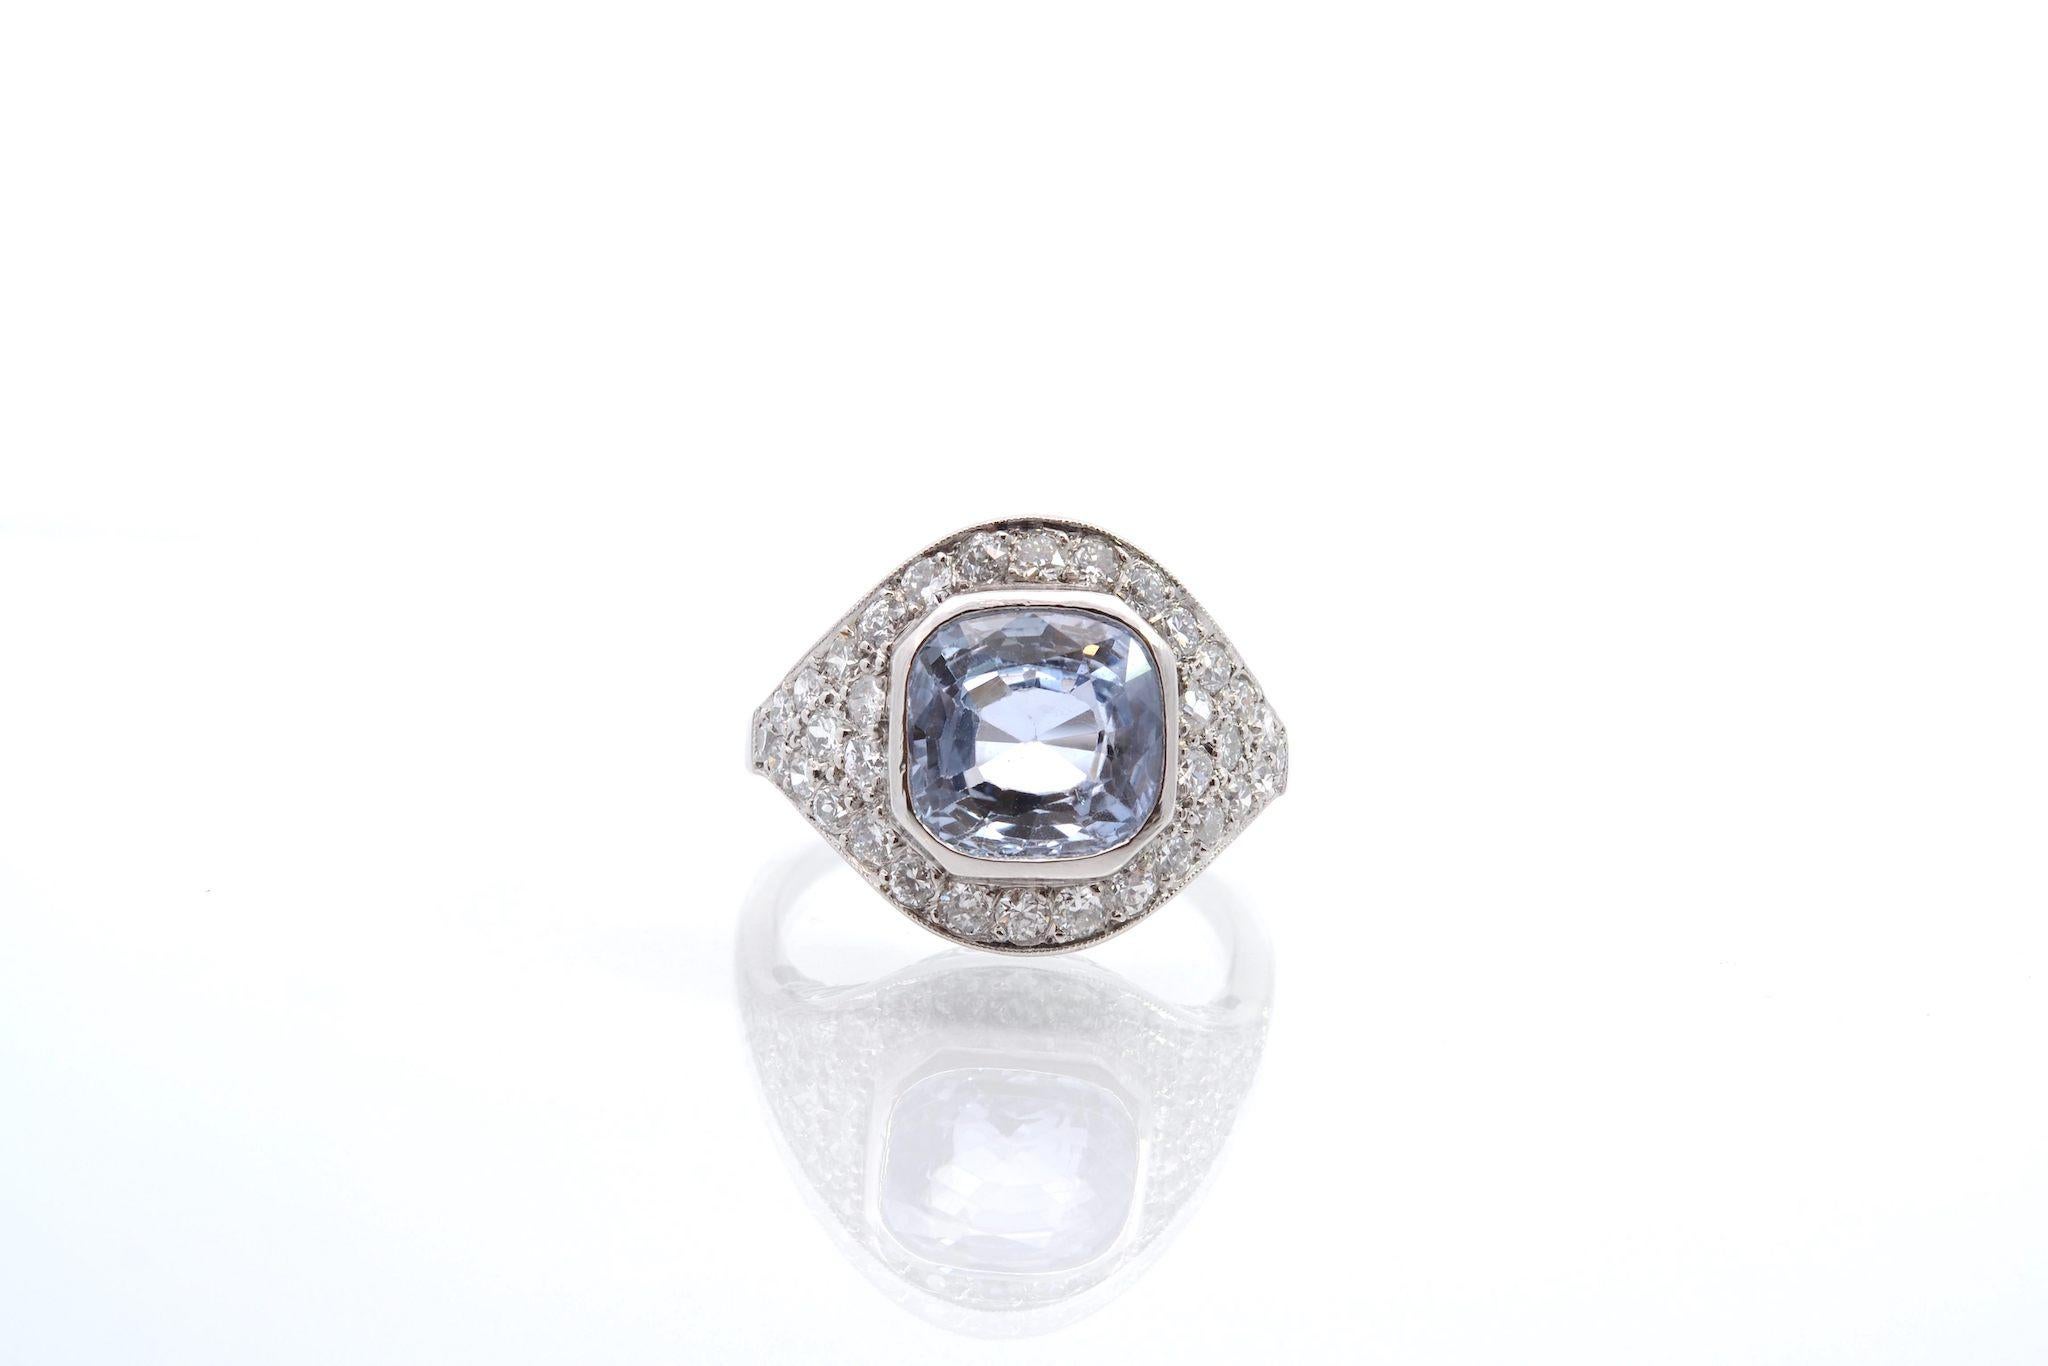 Stones: 1 natural Ceylon sapphire: 3.94cts, 14 diamonds: 1.10cts
Material: Platinum
Dimensions: 1.5cm
Weight: 7g
Period: Recent, handmade art deco style
Size: 54 (free sizing)
Certificate
Ref. : 25311 25444